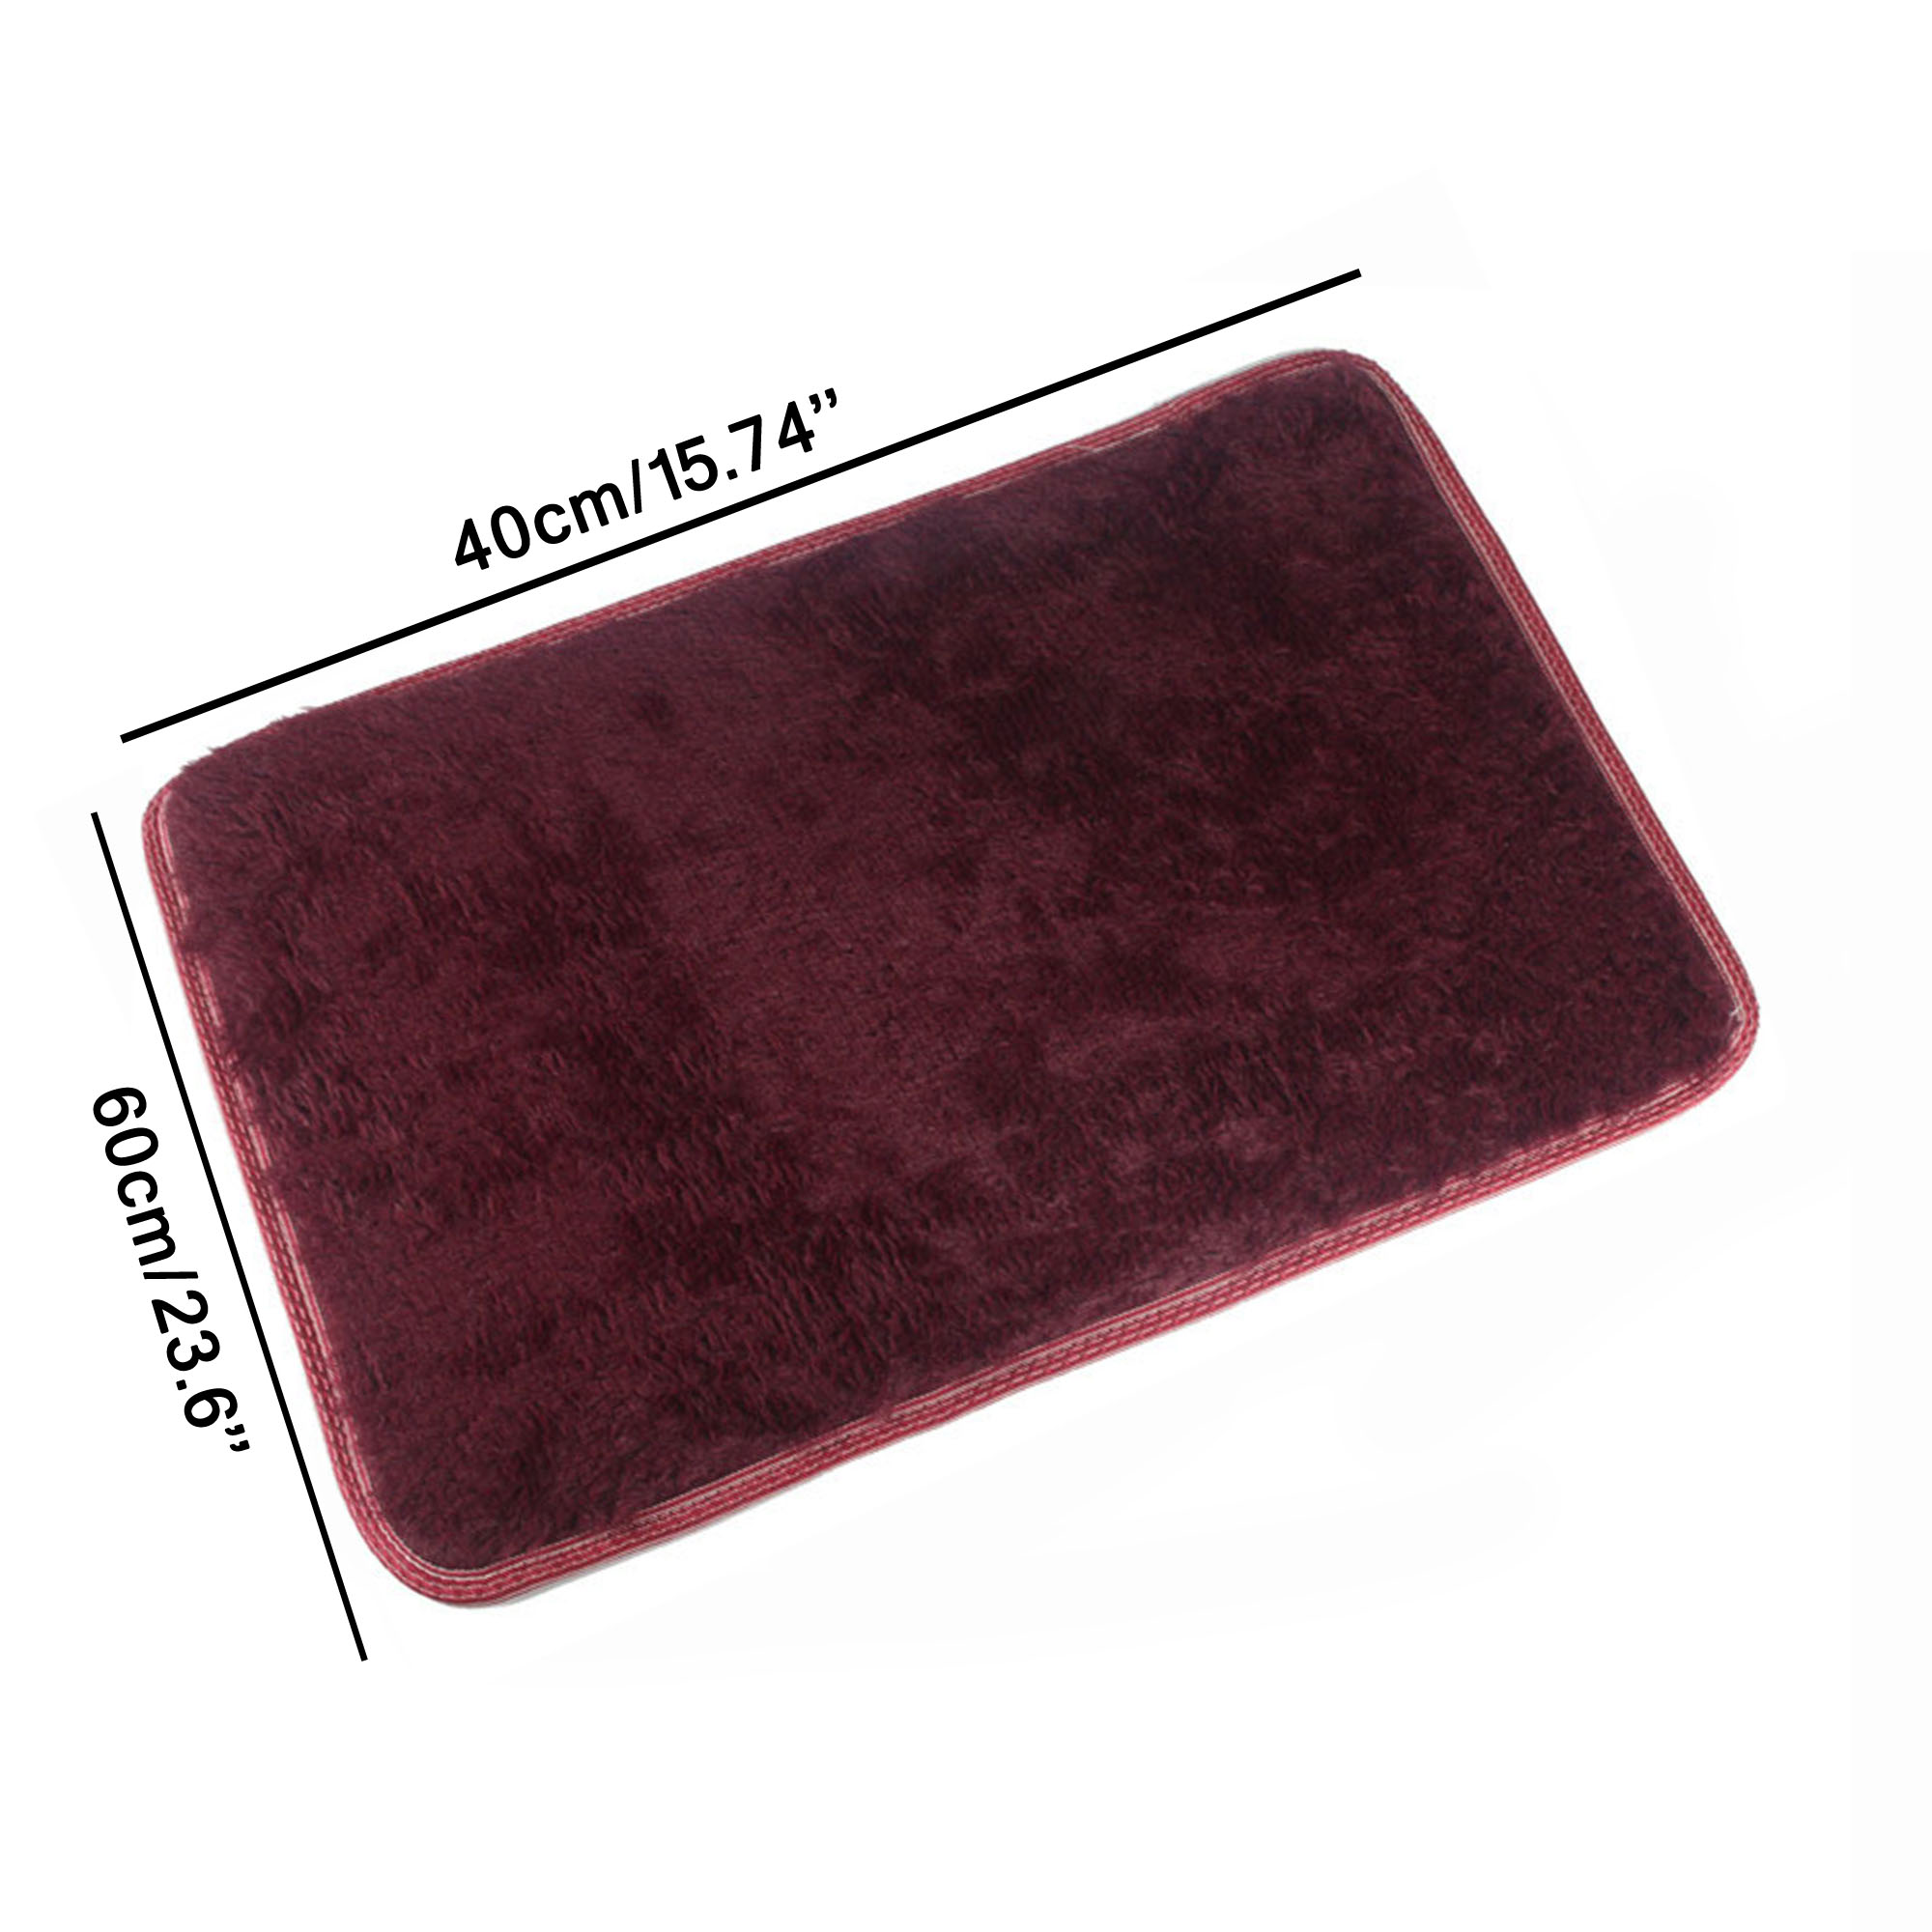 NK Home Rugs 16x24'' Rectangle Oblong Shape Bedroom Fluffy Rugs Anti-Skid Shaggy Area Home Decration Office Sitting Drawing Room Gateway Door Carpet Play Mat Red , Small Rug - image 2 of 3